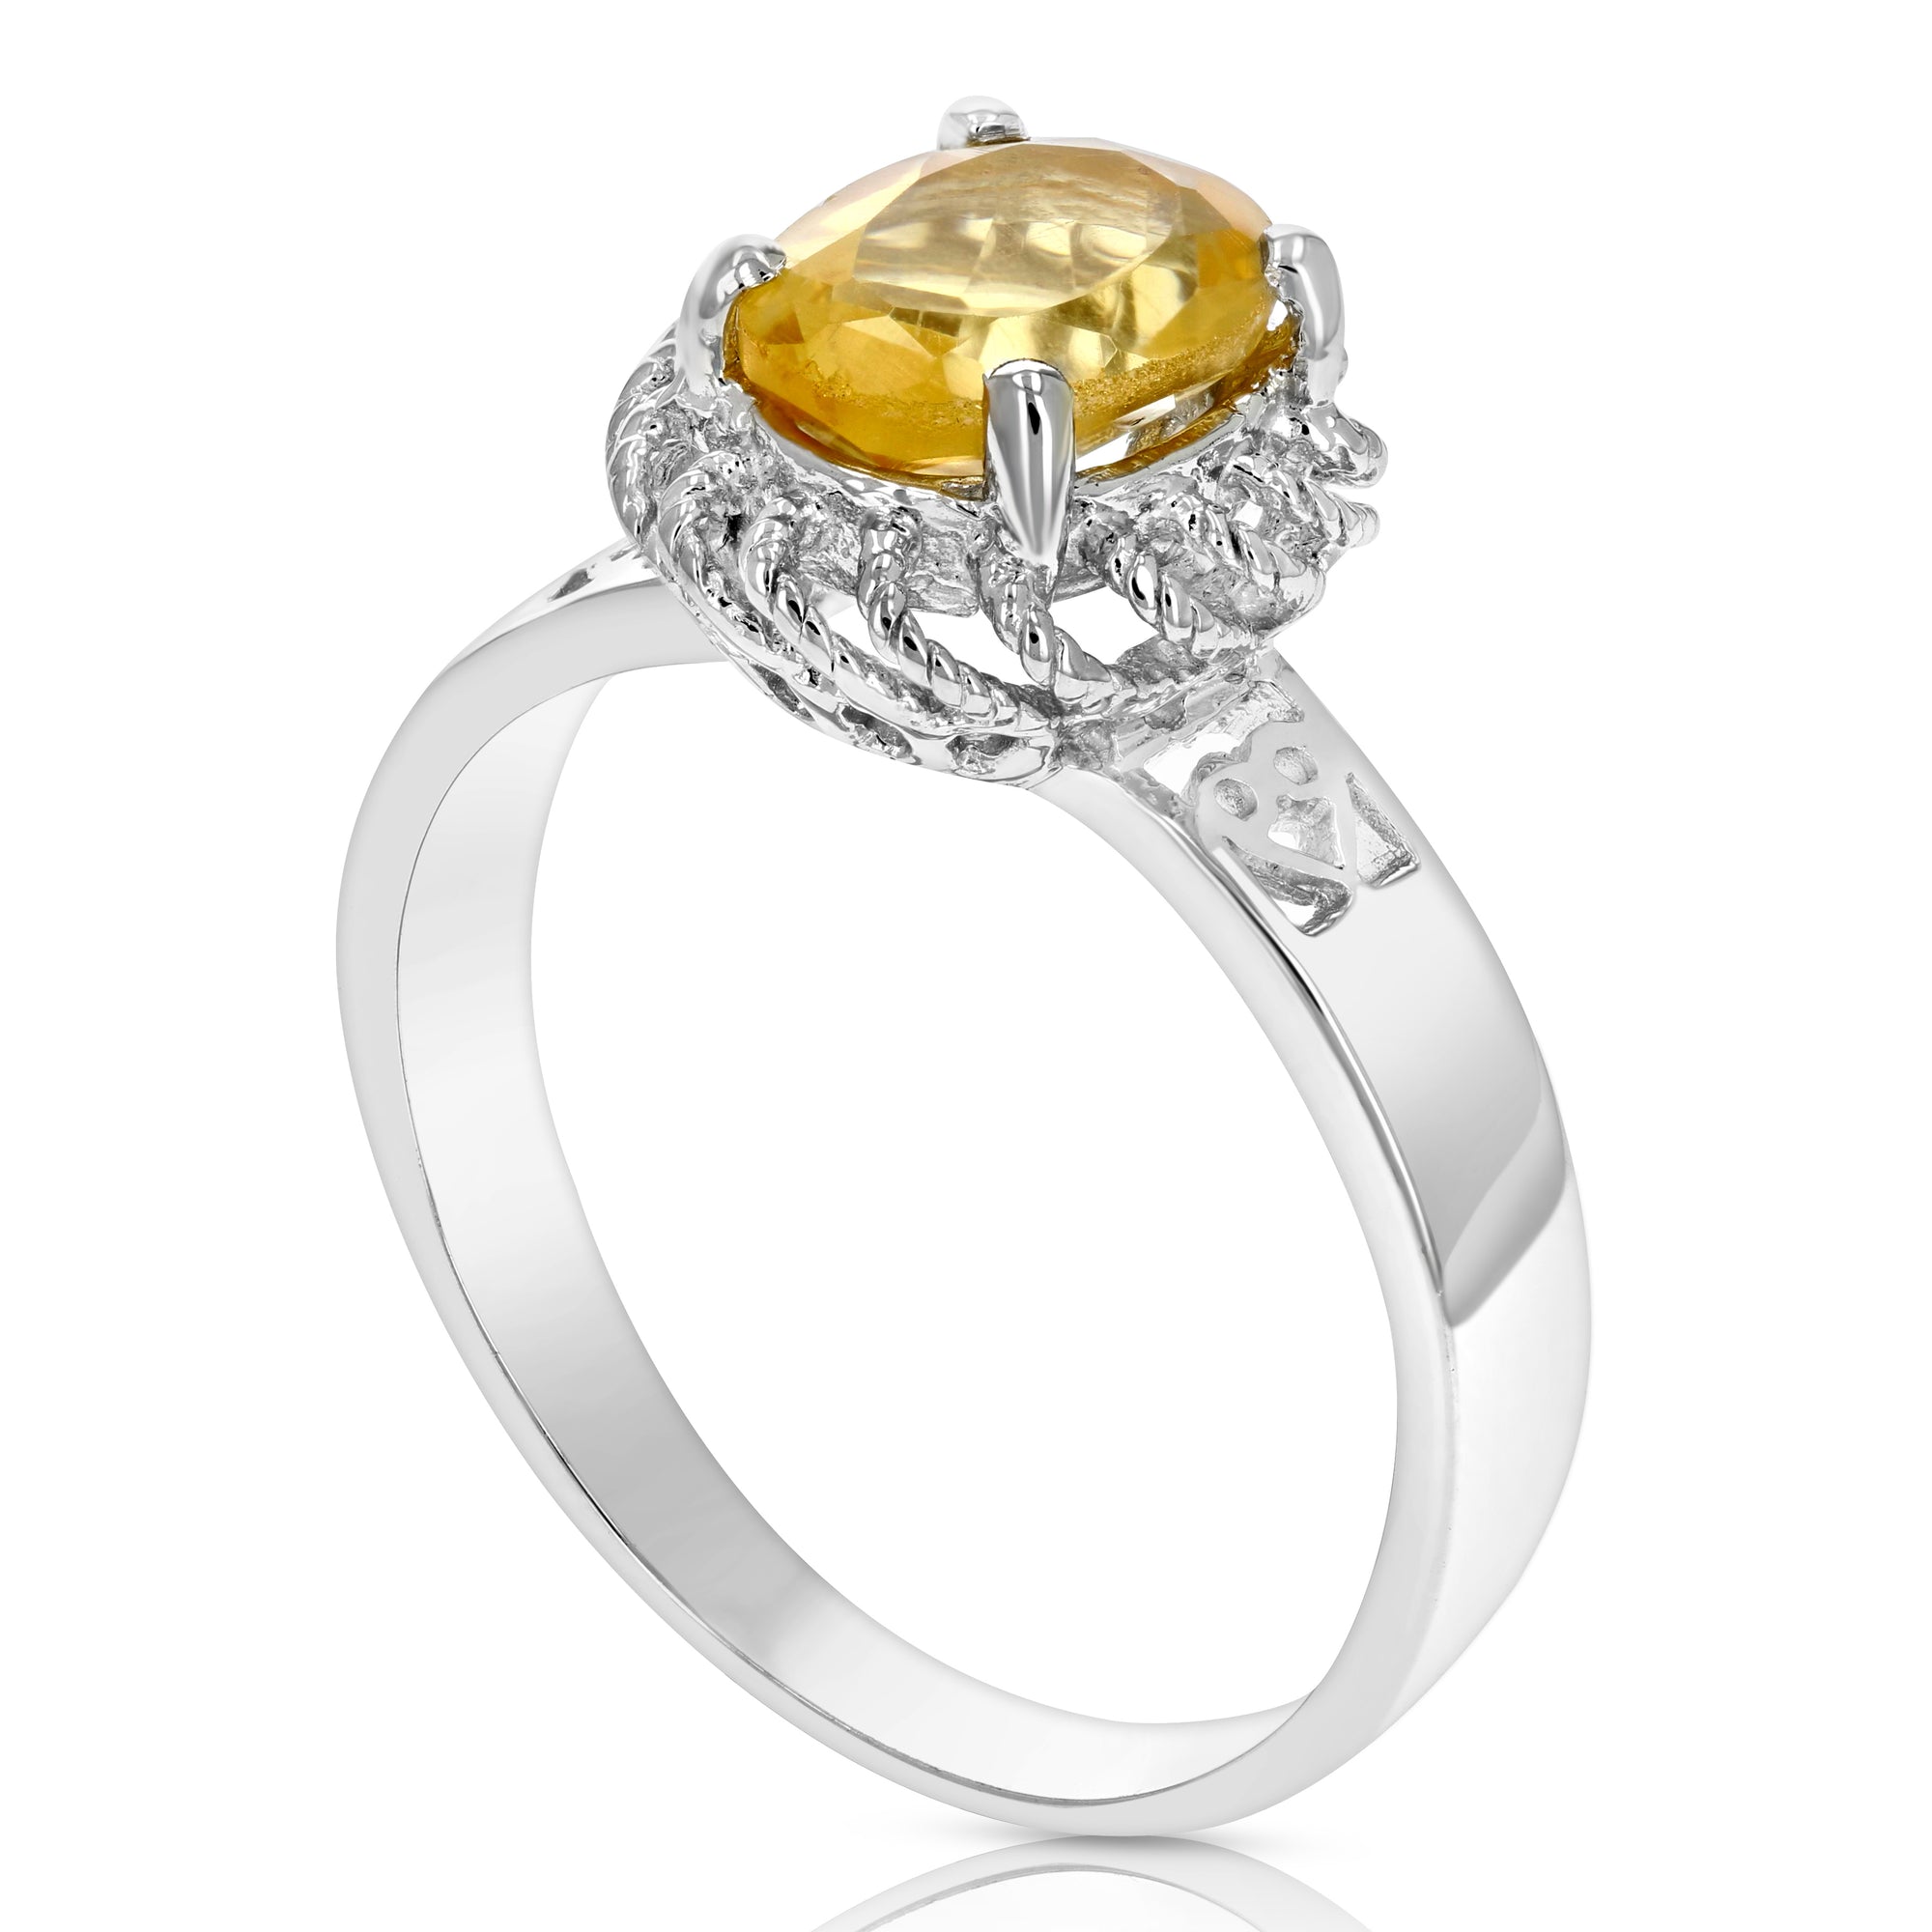 1.60 cttw Citrine Ring .925 Sterling Silver with Rhodium Plating Filigree Oval